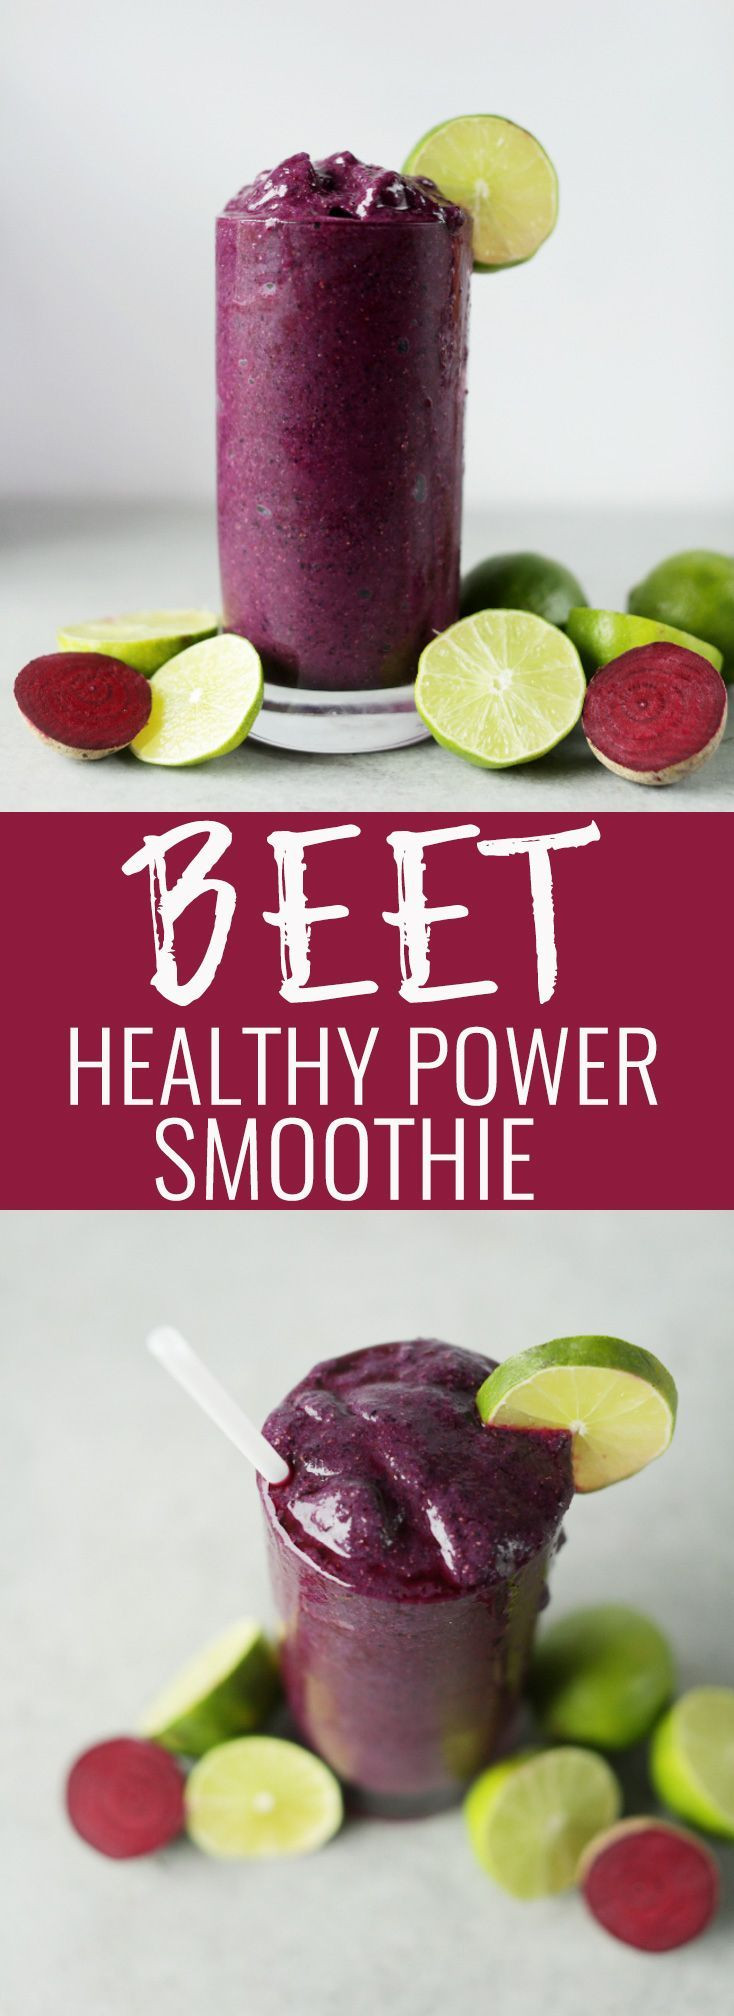 Healthy Detox Smoothies
 Best 25 Smoothie cleanse ideas on Pinterest